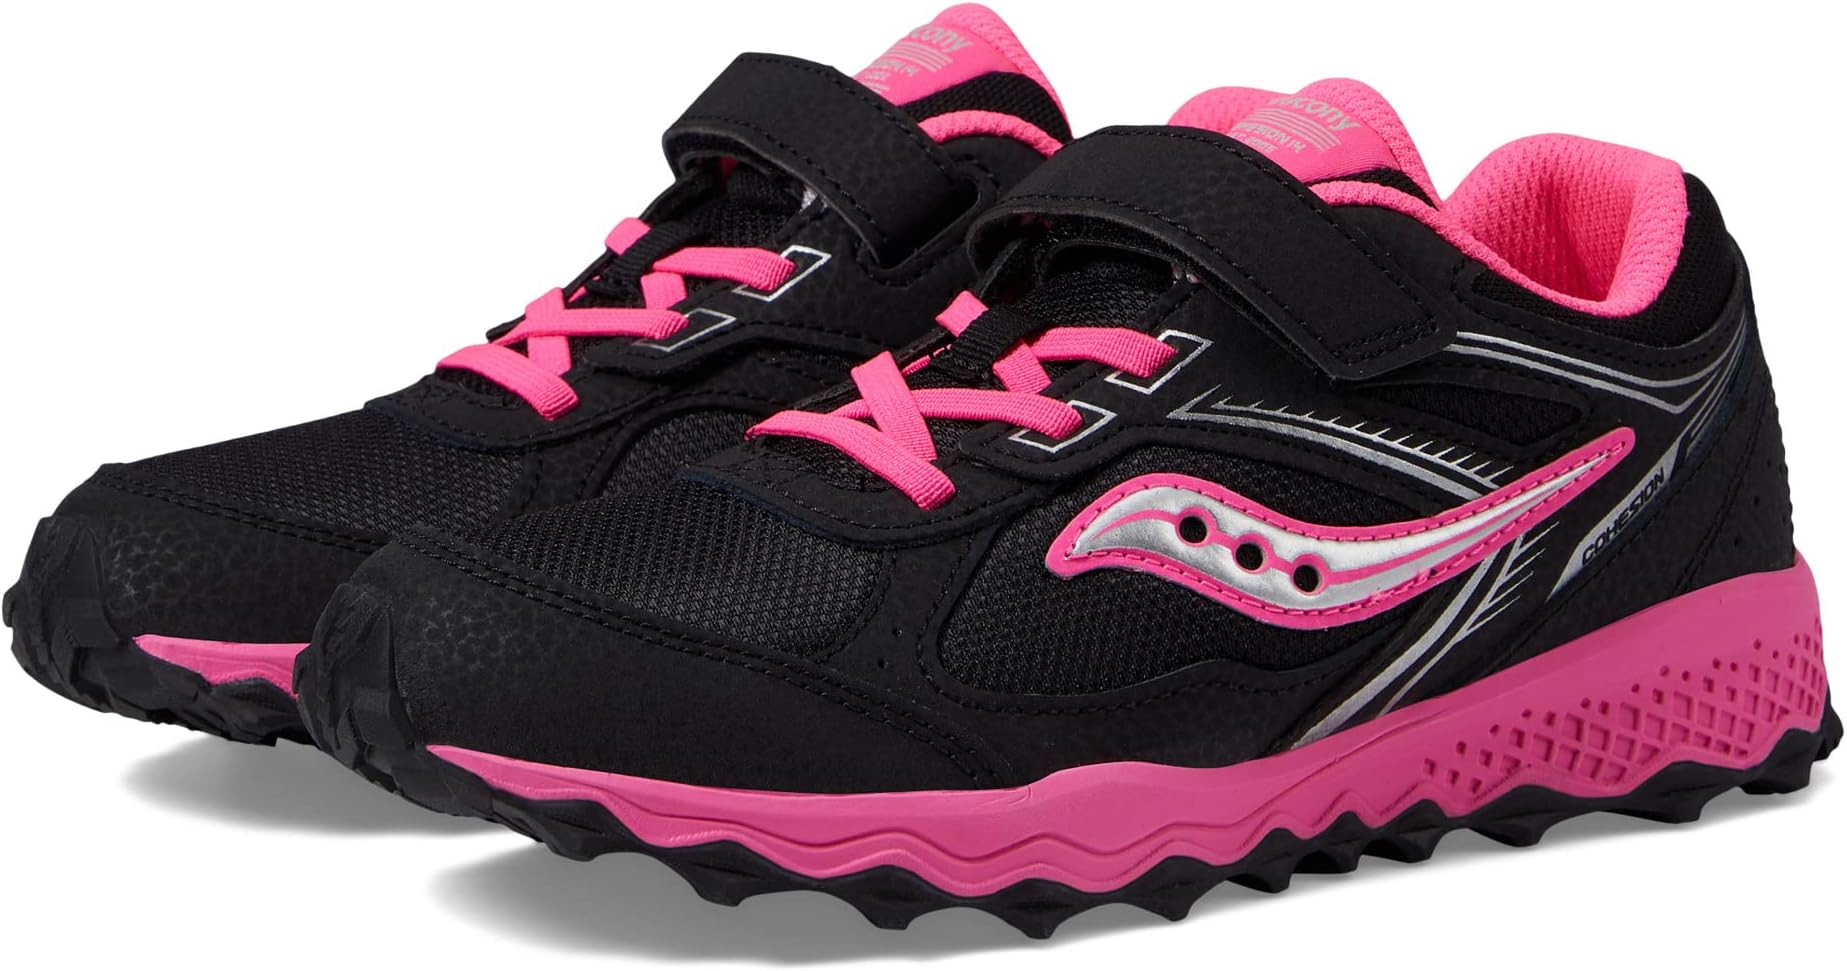 Кроссовки Saucony Kids Cohesion TR14 A/C Trail Running Shoes Saucony Kids, цвет Black/Pink кроссовки saucony saucony cohesion tr14 a c trail running shoe цвет black grey dust